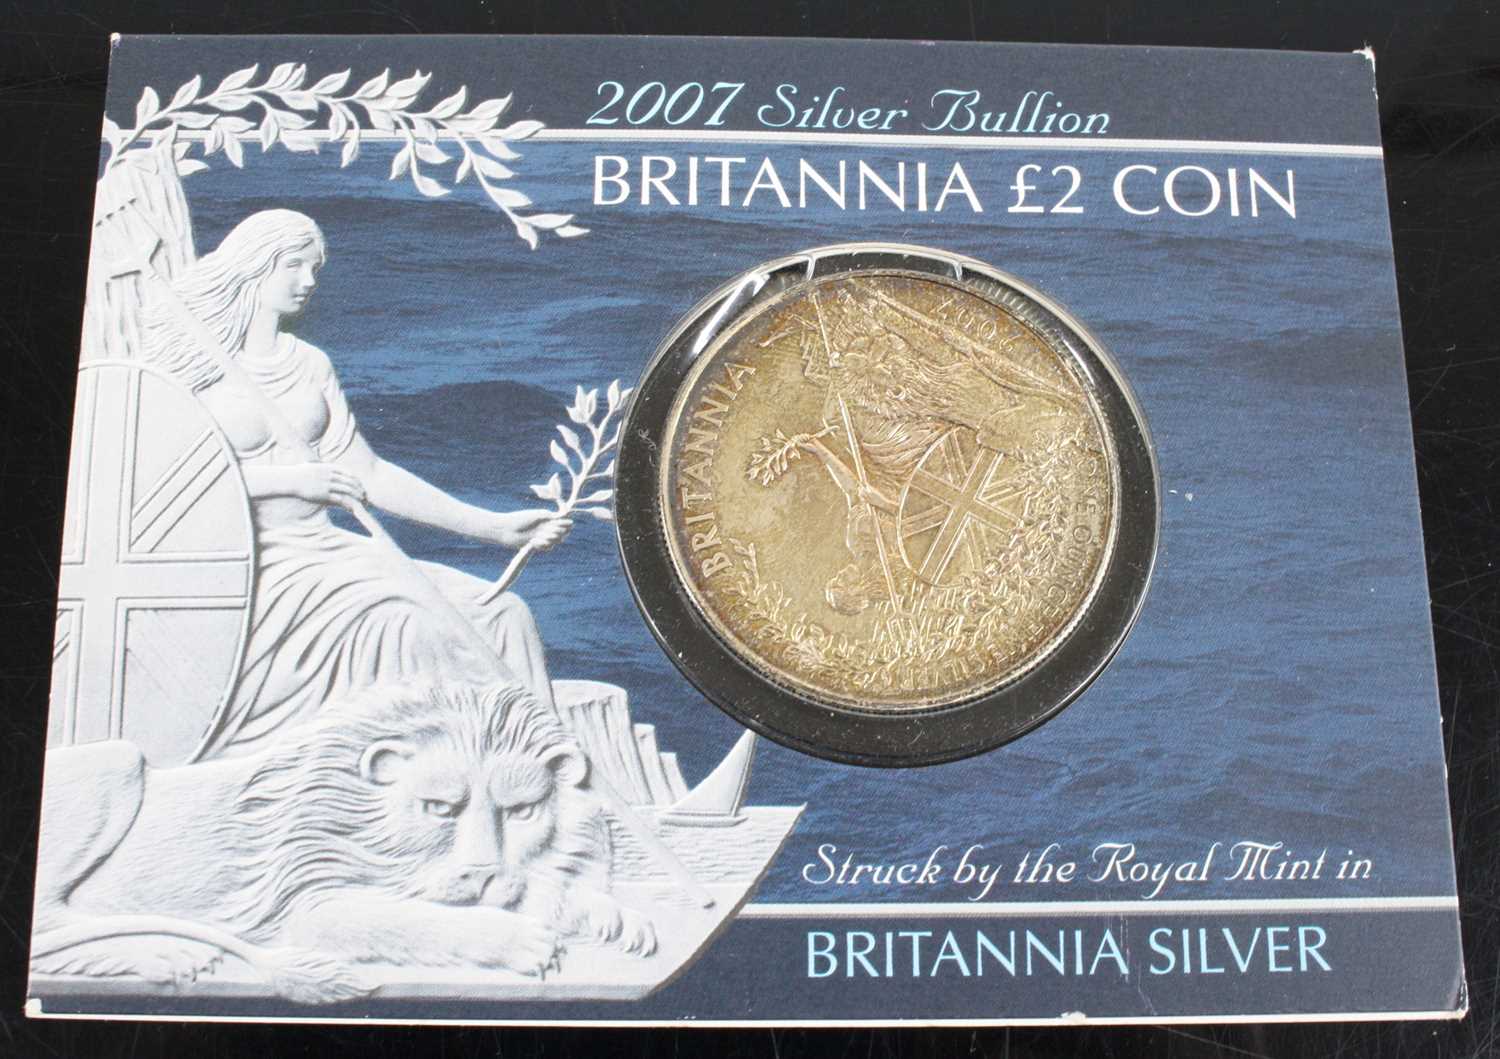 United Kingdom, The Royal Mint, 2007 Silver Bullion Britannia £2 Coin, in card sleeve, together with